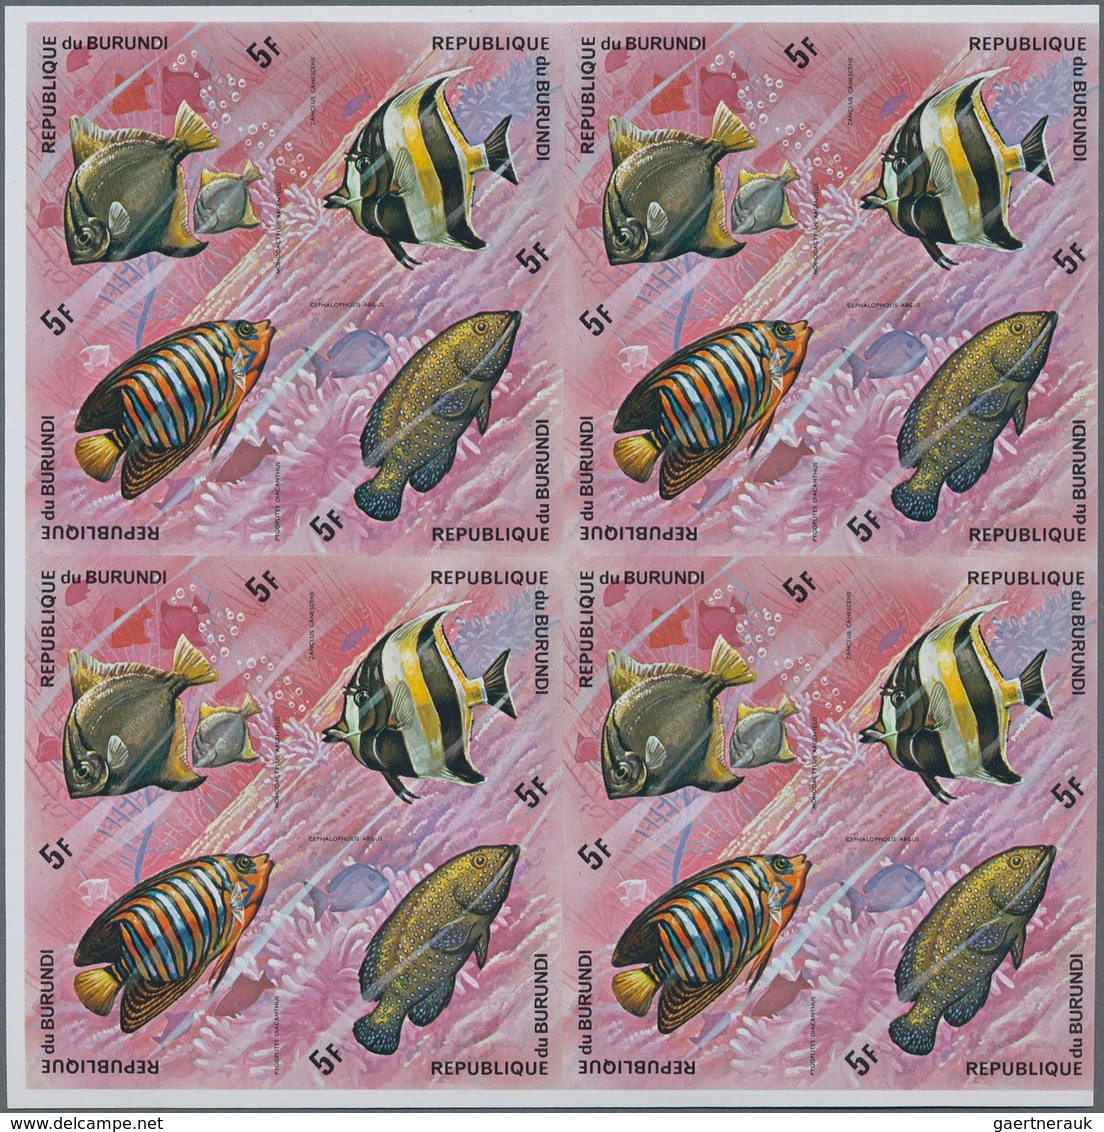 Burundi: 1970/1992. Lot of 9,895 IMPERFORATE stamps, souvenir and miniature sheets showing various i